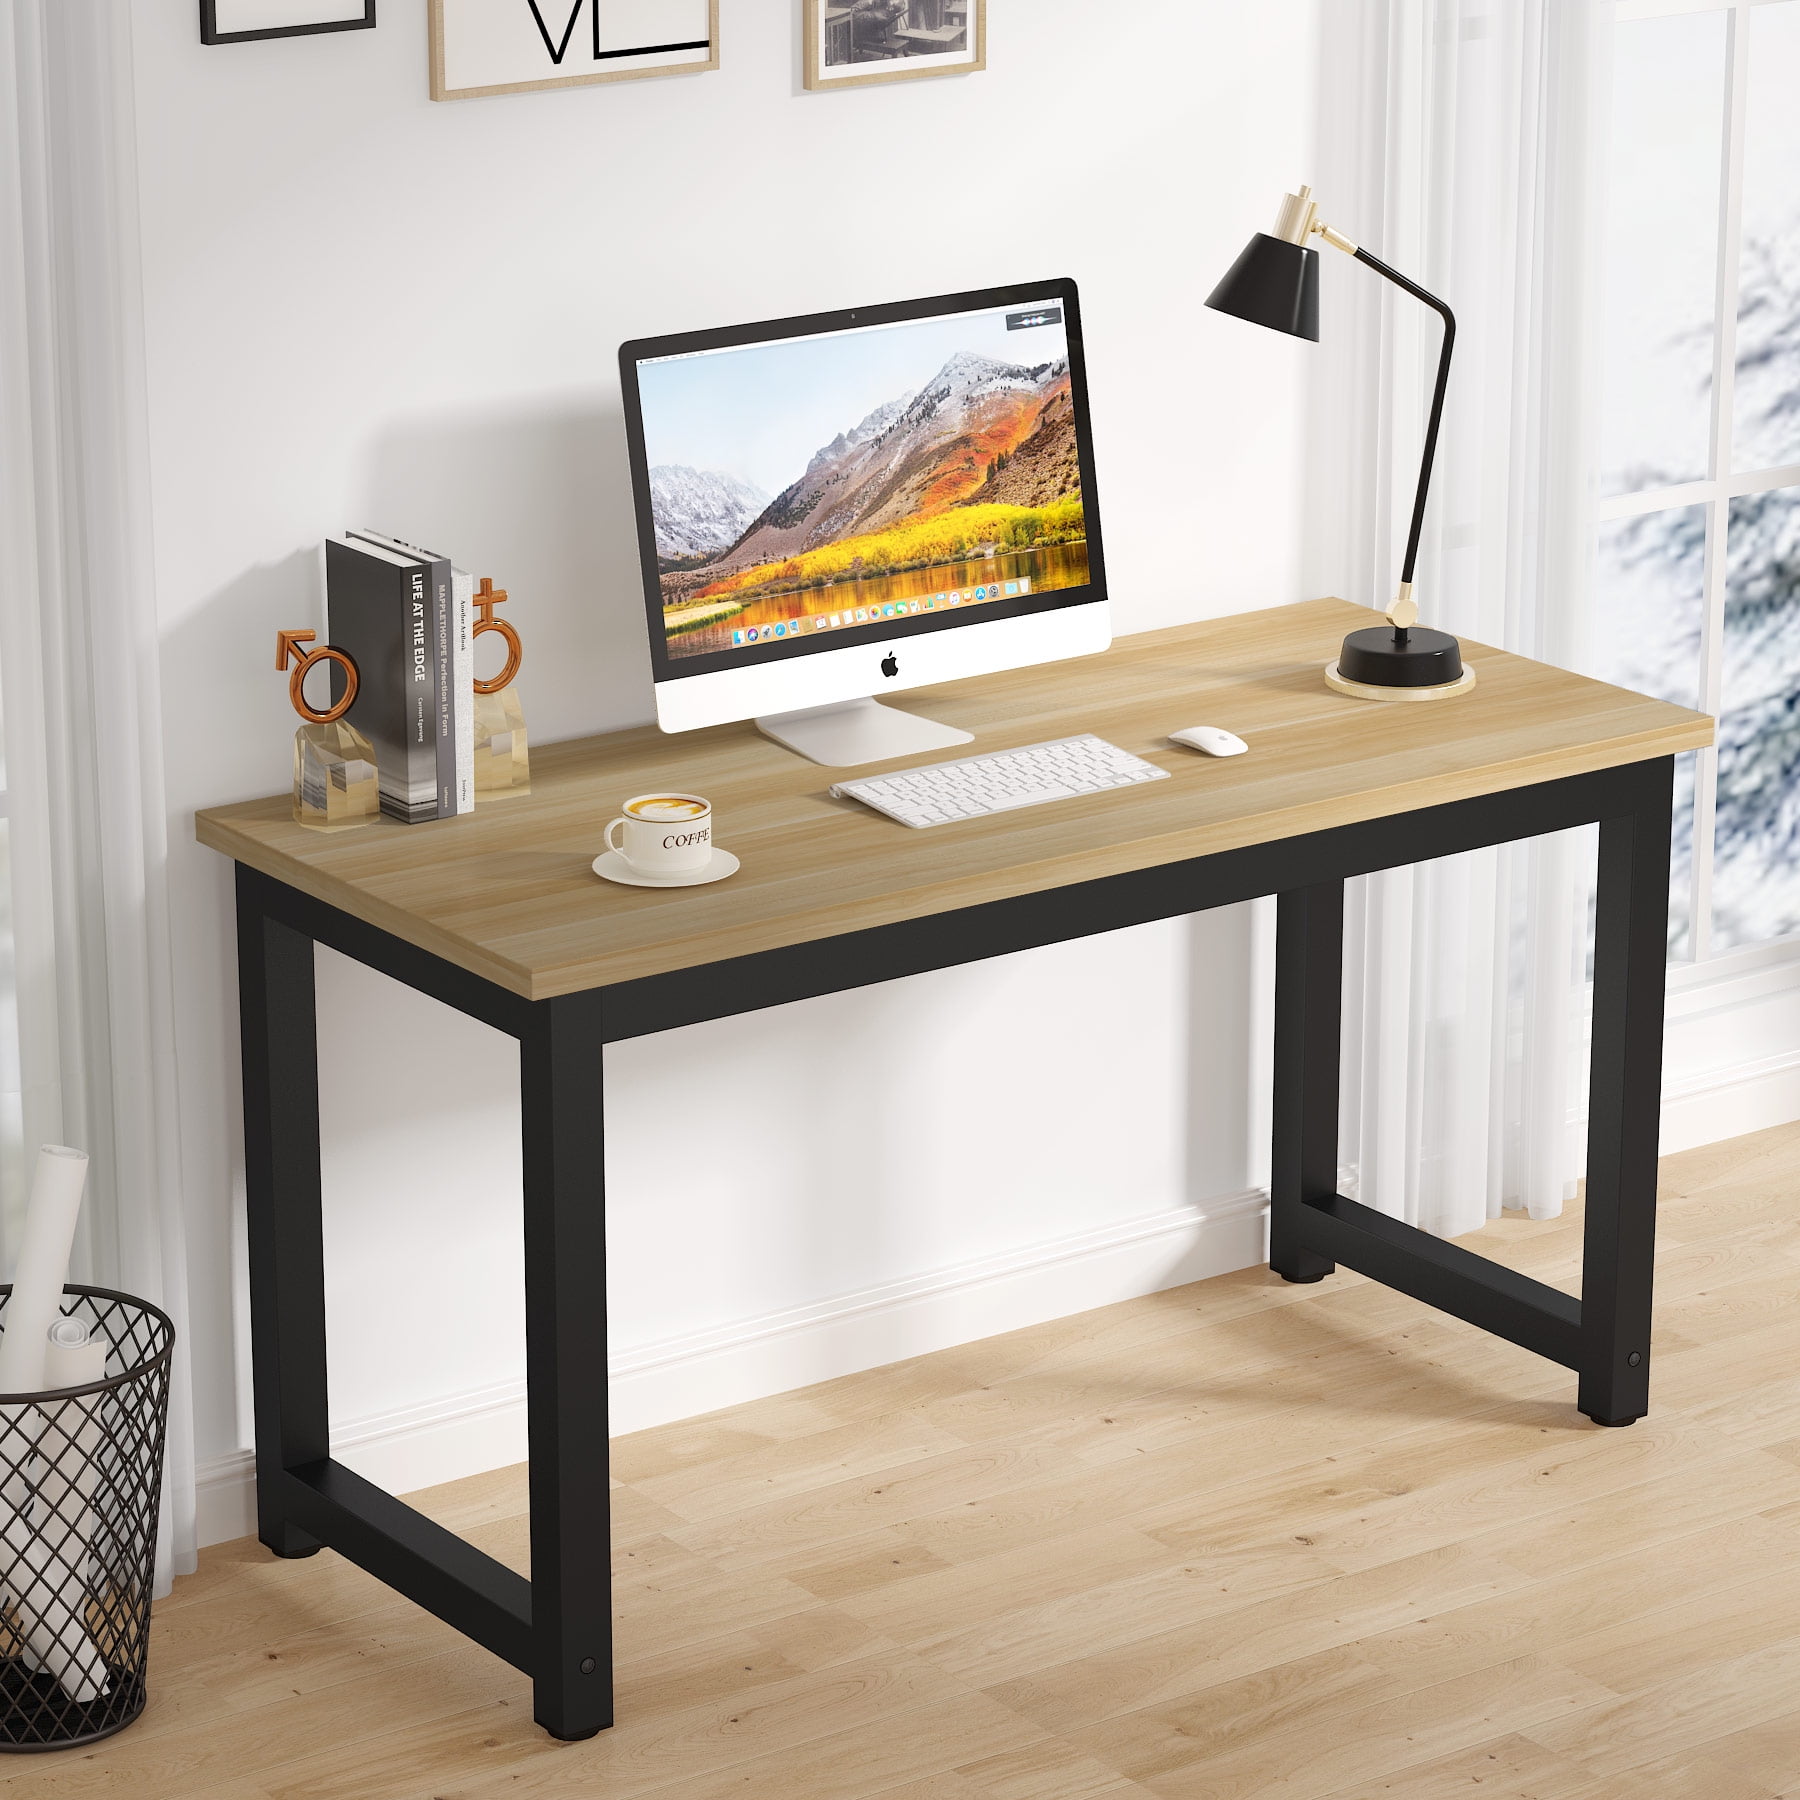 55&quot; Large Computer Desk, Modern Simple Style Study Writing Desk, Study Table Laptop Table for Home Office